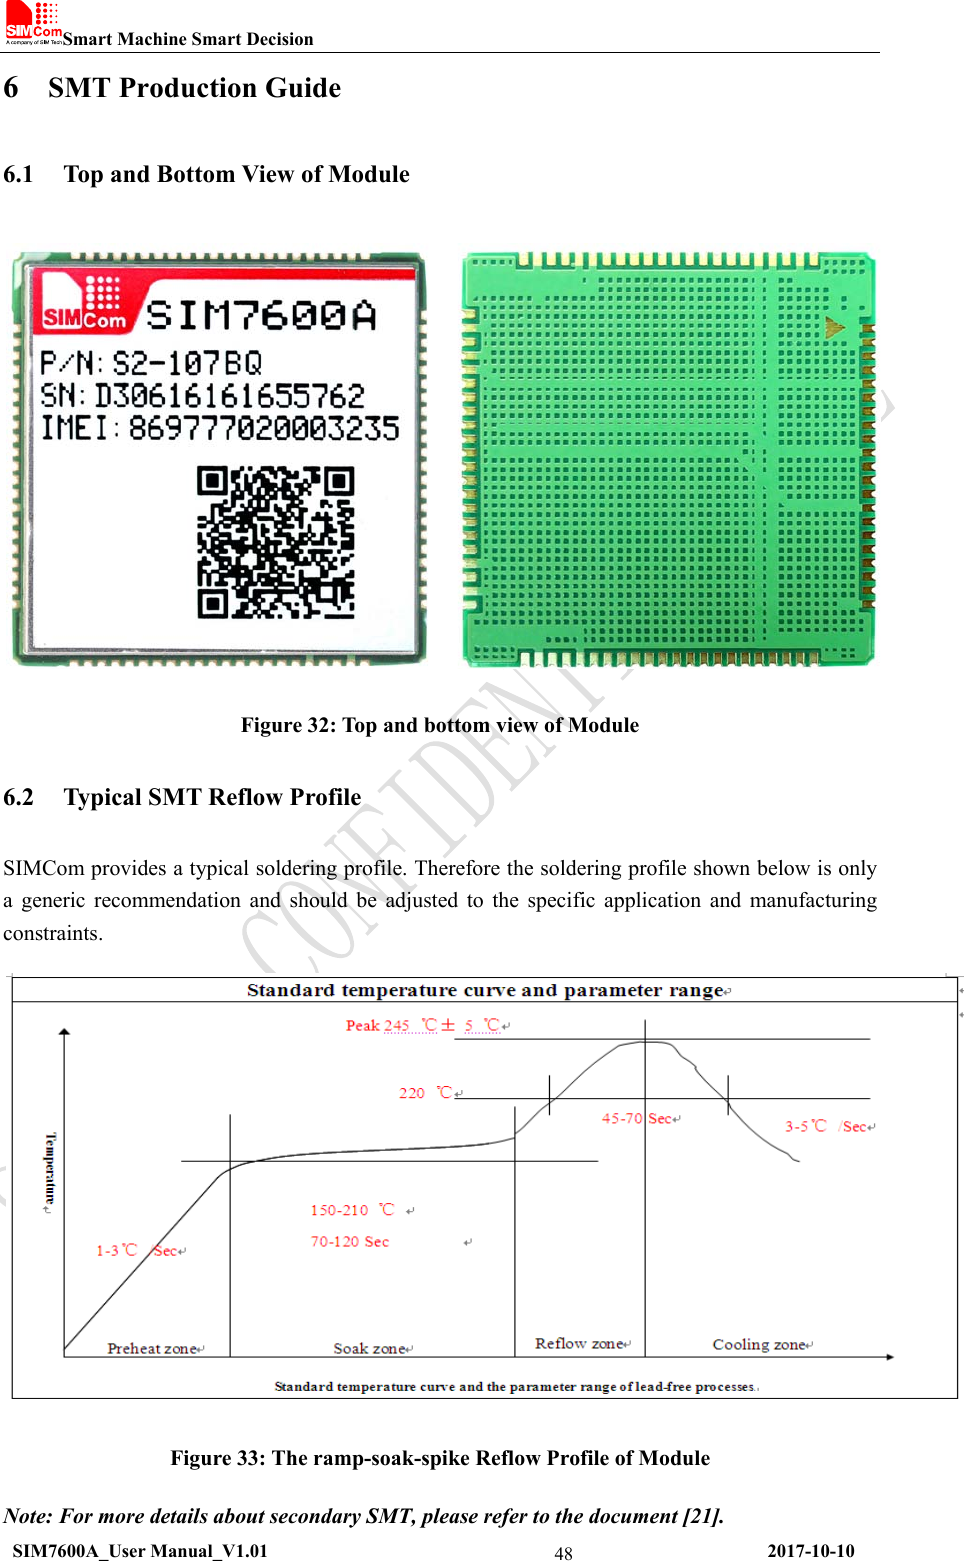 Smart Machine Smart Decision  SIM7600A_User Manual_V1.01                                                     2017-10-10 486 SMT Production Guide 6.1 Top and Bottom View of Module  Figure 32: Top and bottom view of Module 6.2 Typical SMT Reflow Profile SIMCom provides a typical soldering profile. Therefore the soldering profile shown below is only a generic recommendation and should be adjusted to the specific application and manufacturing constraints.  Figure 33: The ramp-soak-spike Reflow Profile of Module Note: For more details about secondary SMT, please refer to the document [21]. 